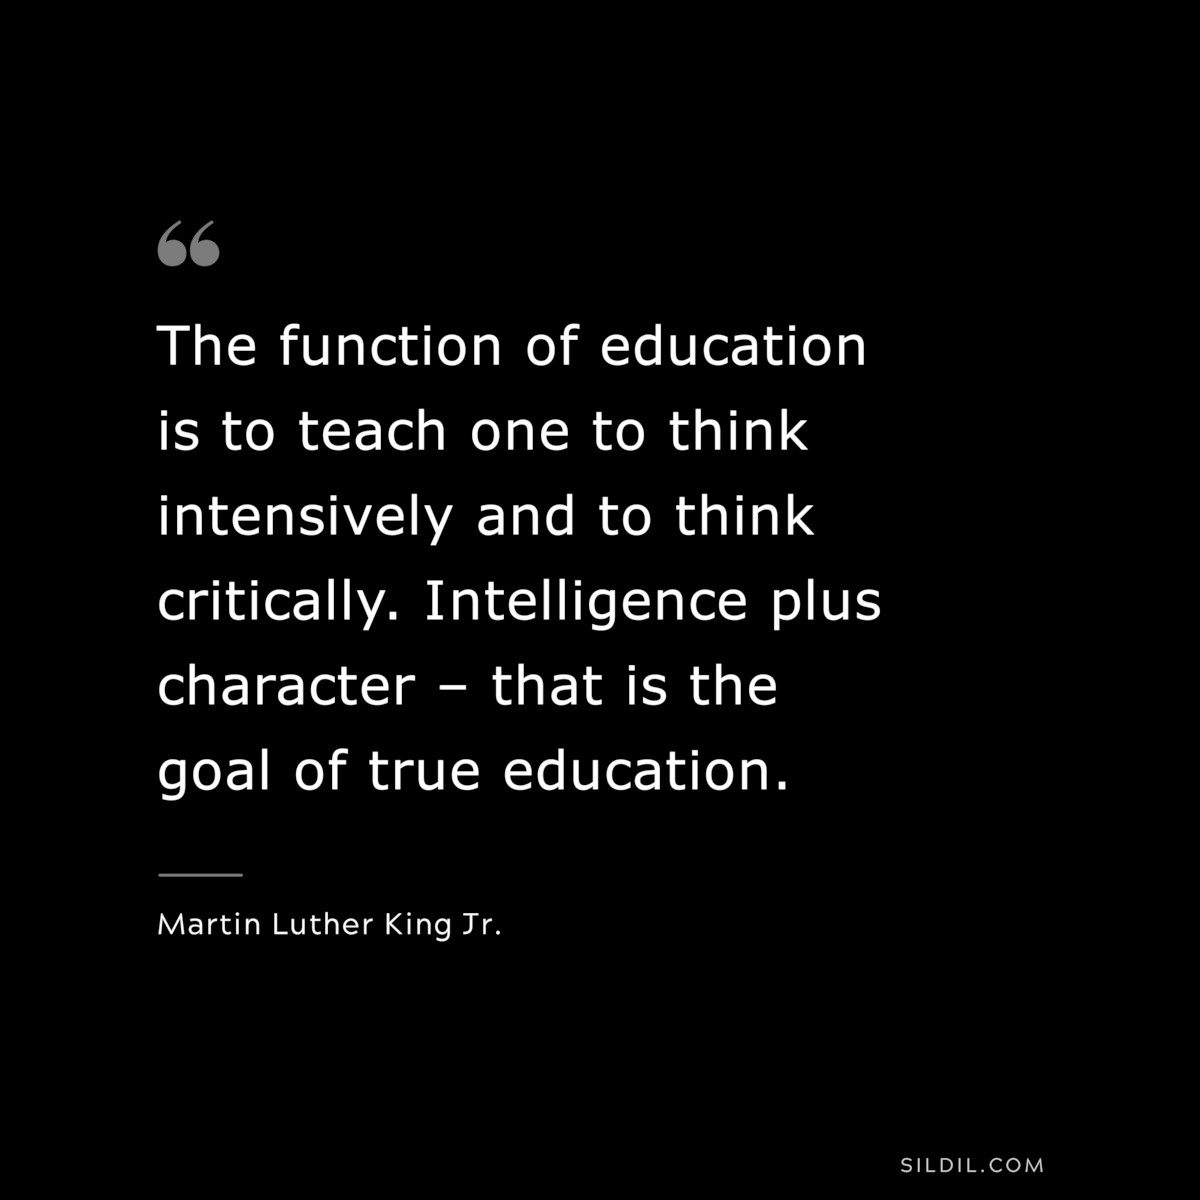 The function of education is to teach one to think intensively and to think critically. Intelligence plus character – that is the goal of true education. ― Martin Luther King Jr.